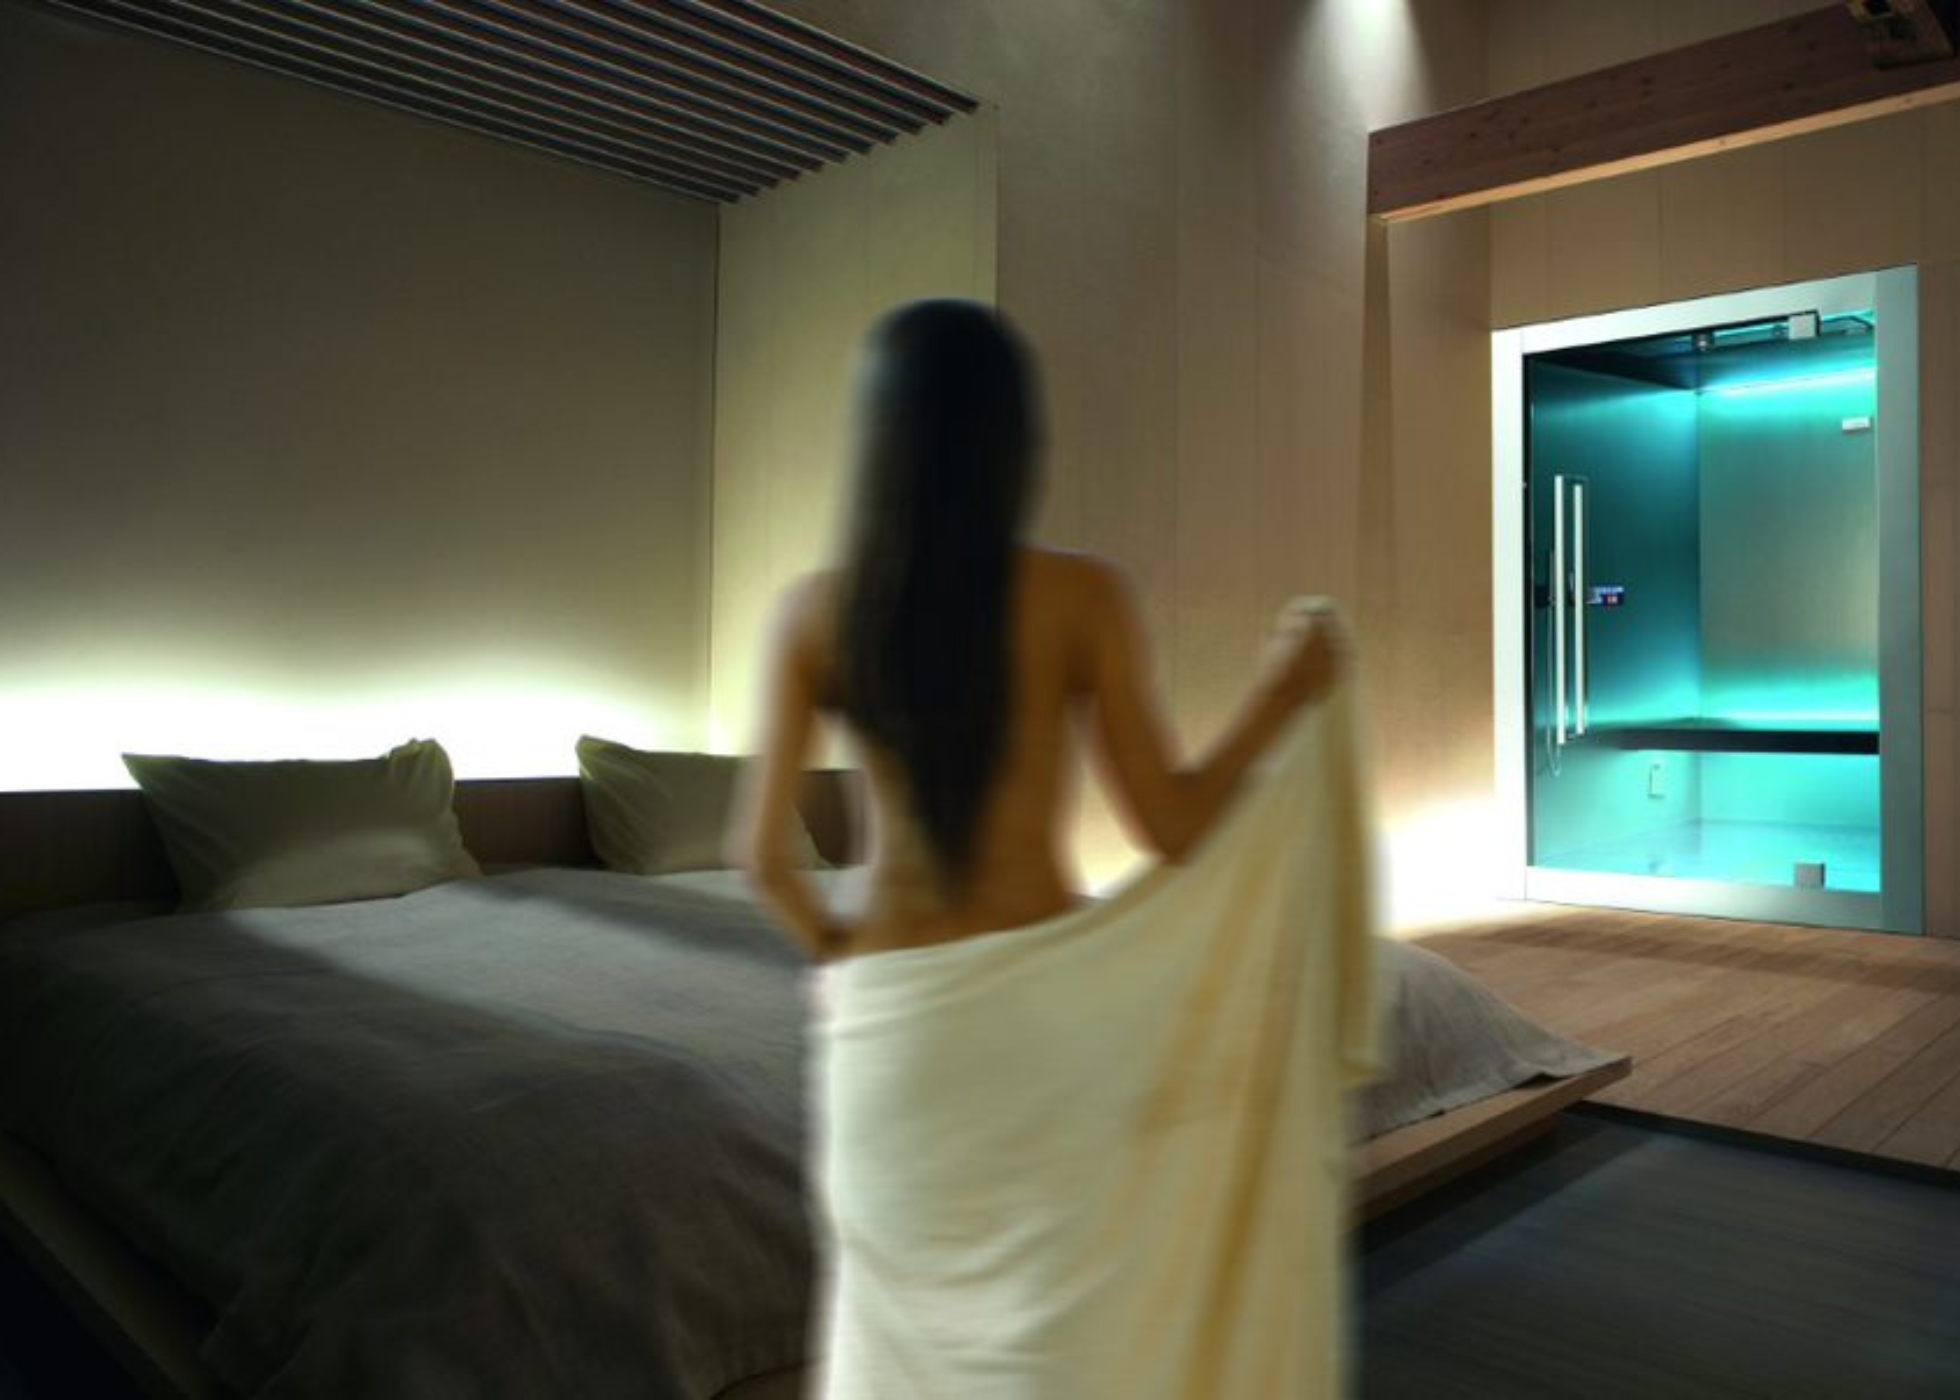 The in-room spa satisfies the widespread desire to experience made-to-measure wellness